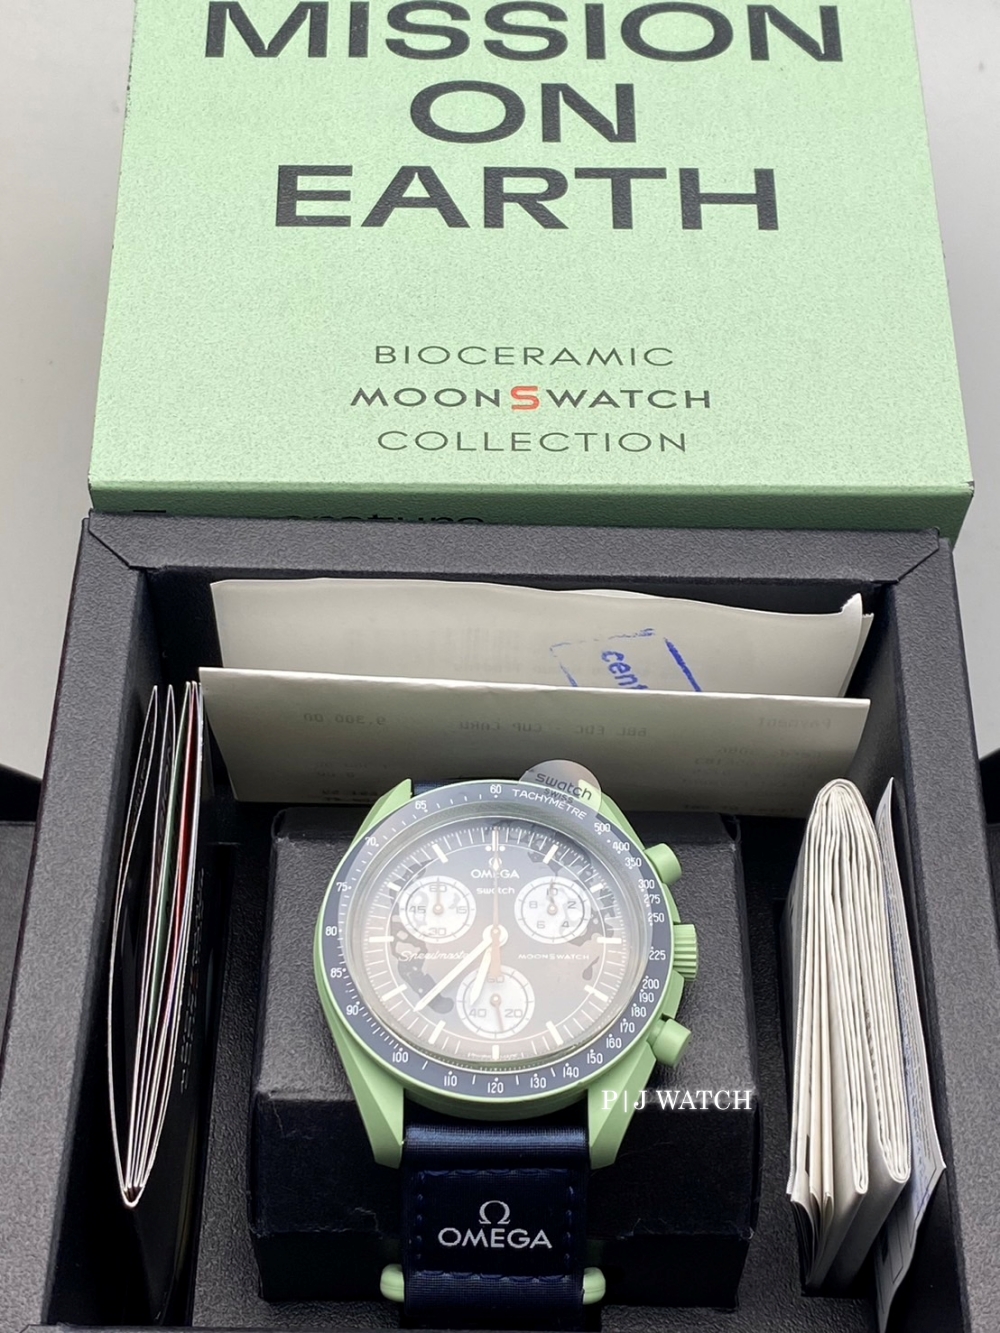 Swatch x Omega MoonSwatch Chronograph Mission on Earth Ref.SO33G100